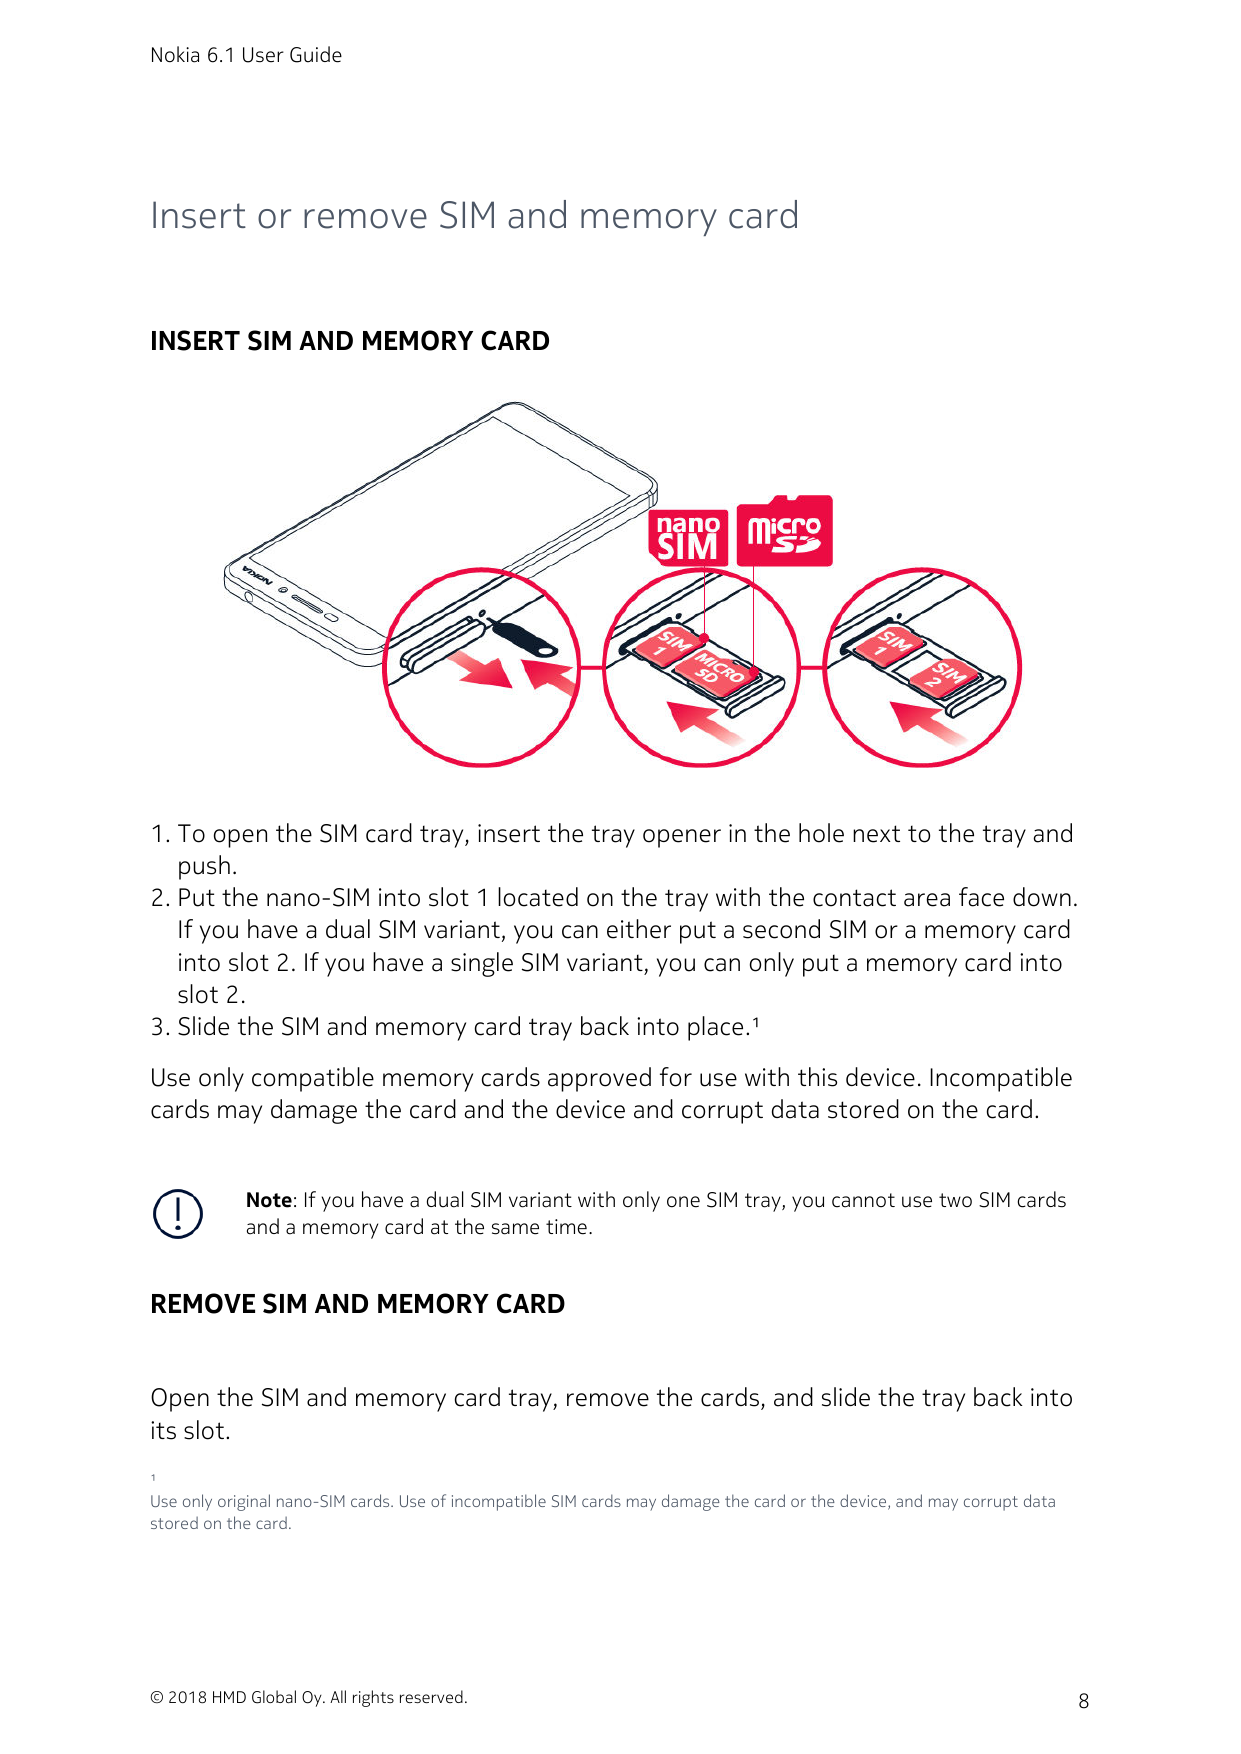 Nokia 6.1 User GuideInsert or remove SIM and memory cardINSERT SIM AND MEMORY CARD1. To open the SIM card tray, insert the tray 